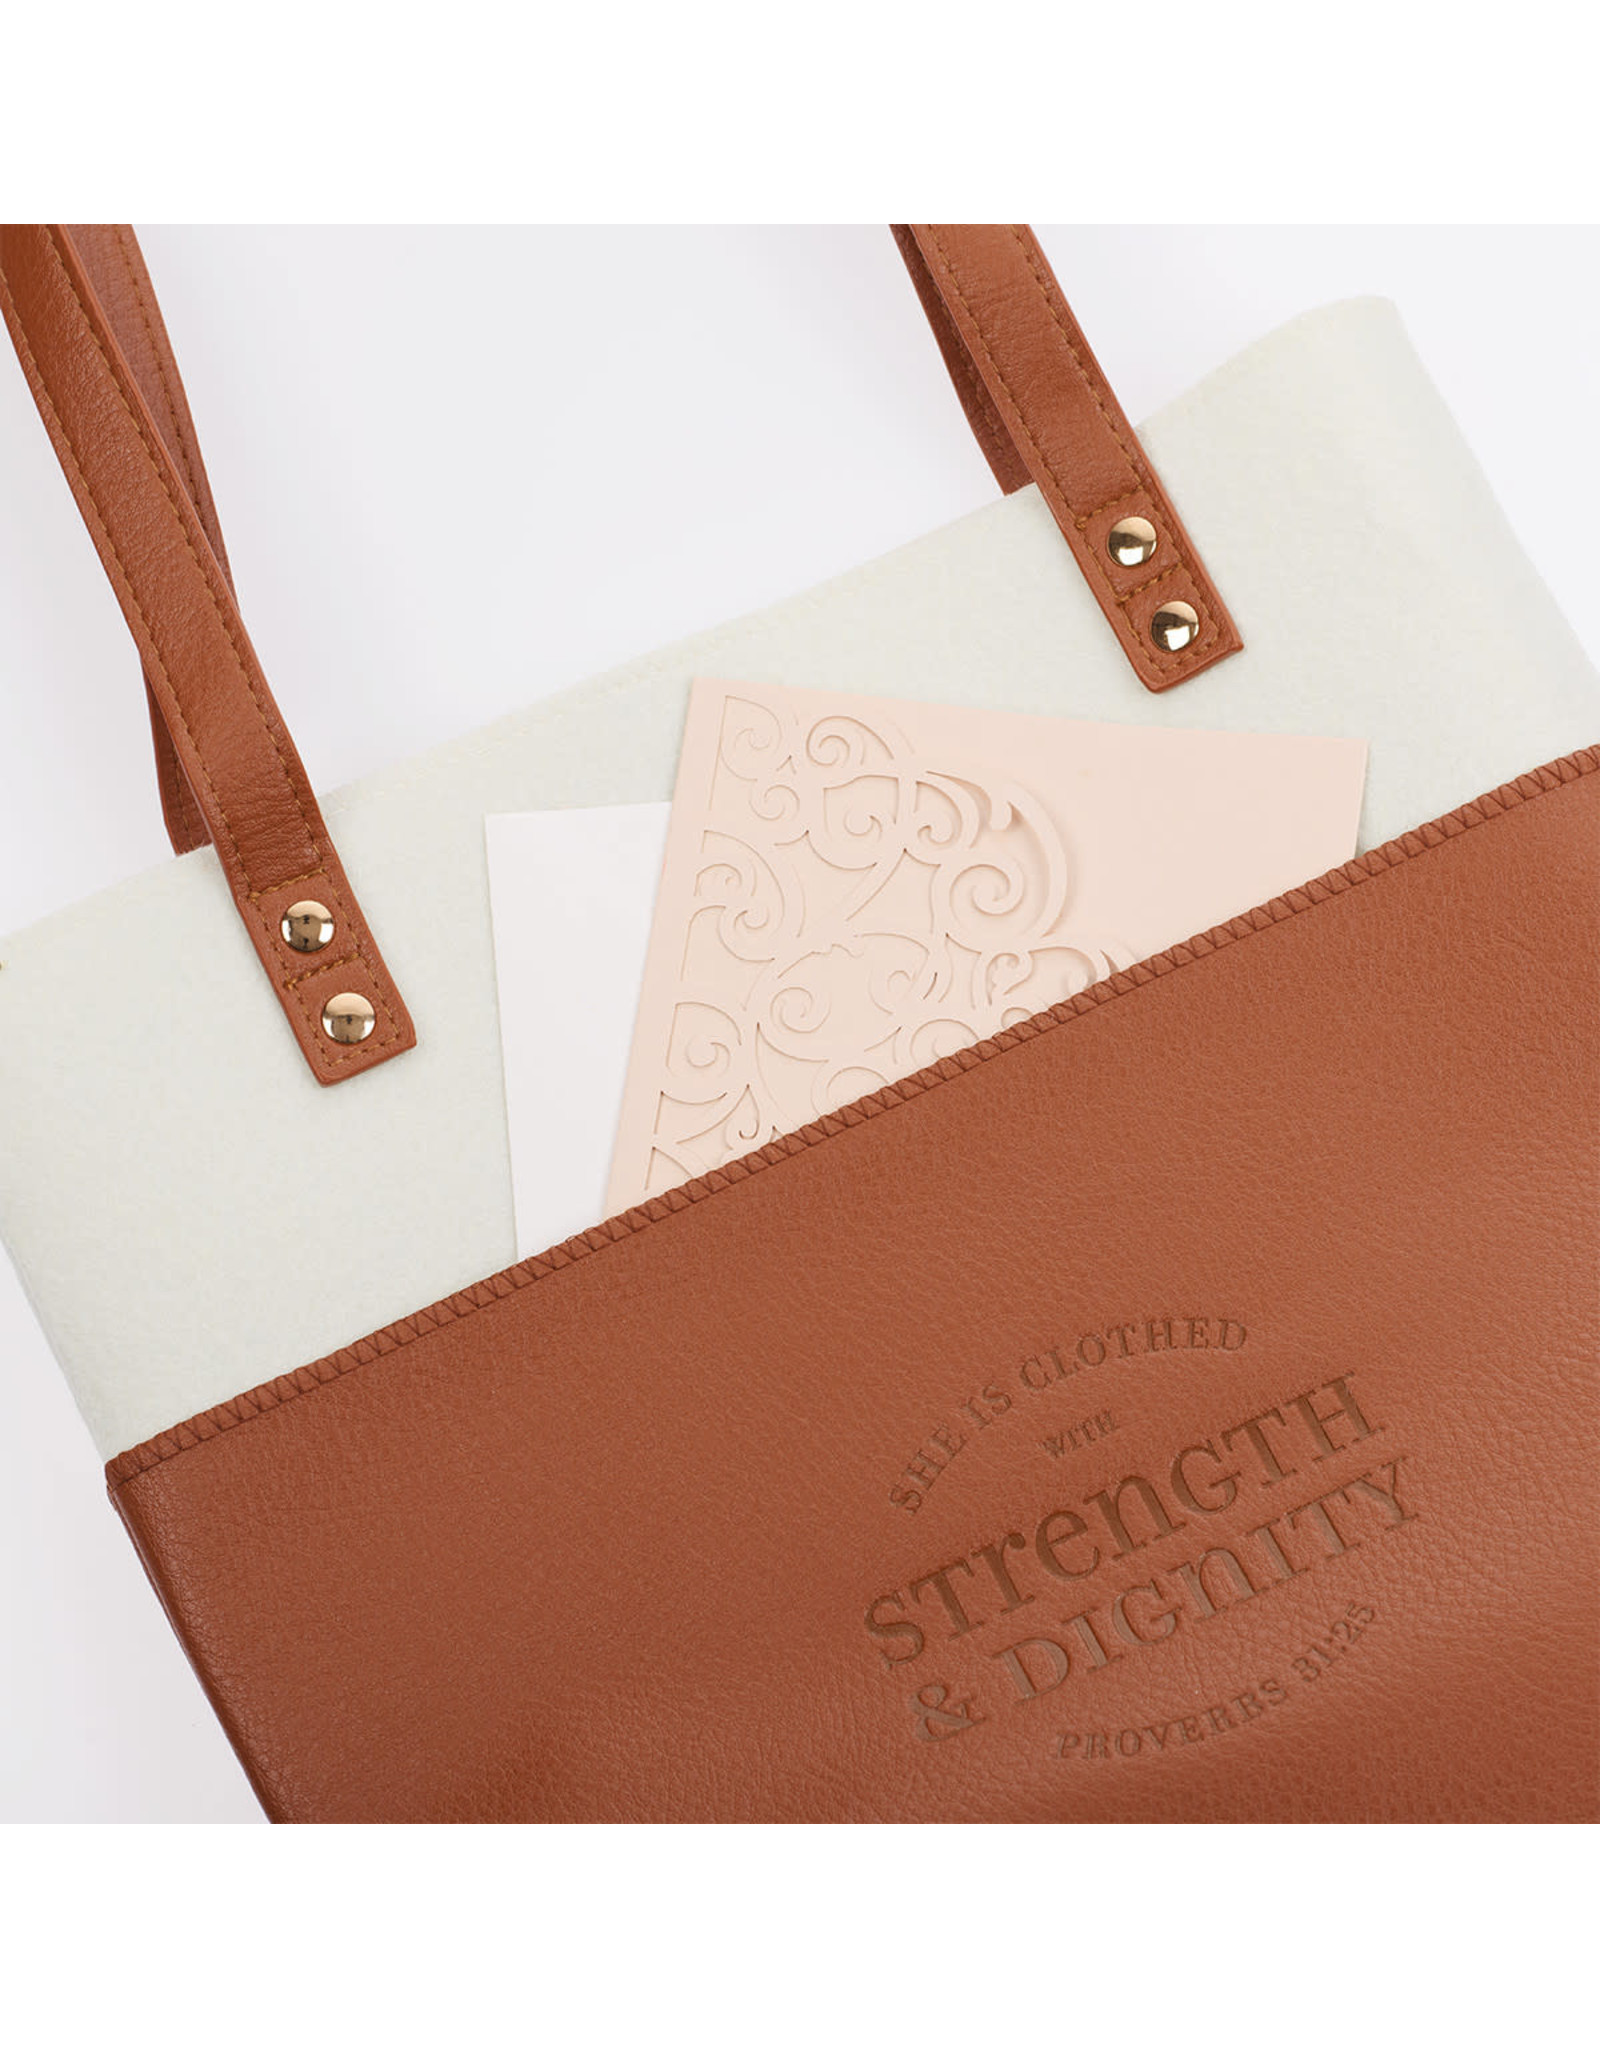 Christian Art Gifts Tote Bag Purse - Strength & Dignity, Toffee & Cream  (Proverbs 31:25)